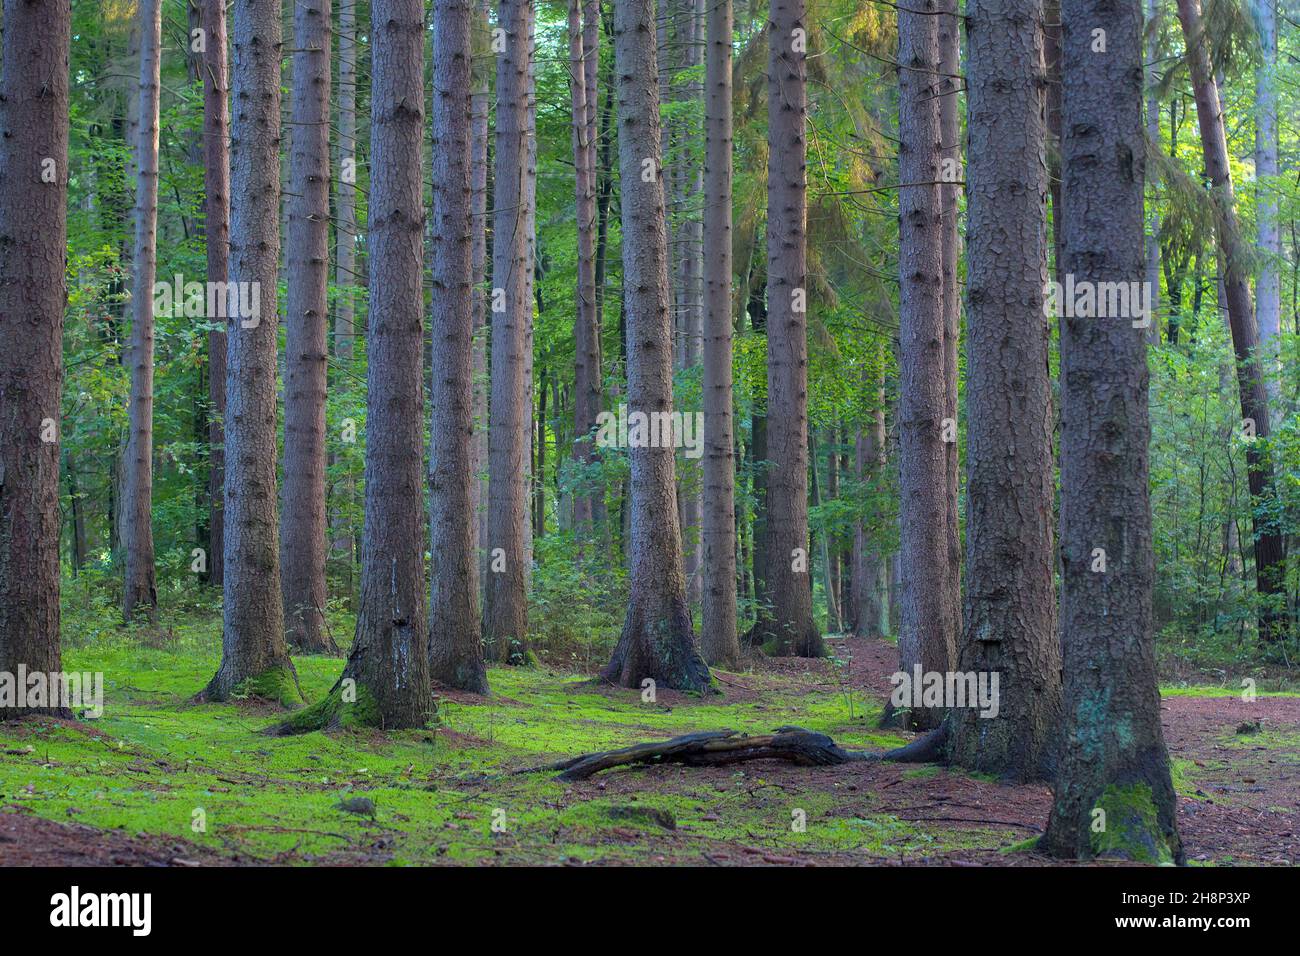 Evergreen pine forest. Green moss, lichen and other plants on the ground. Poland Stock Photo